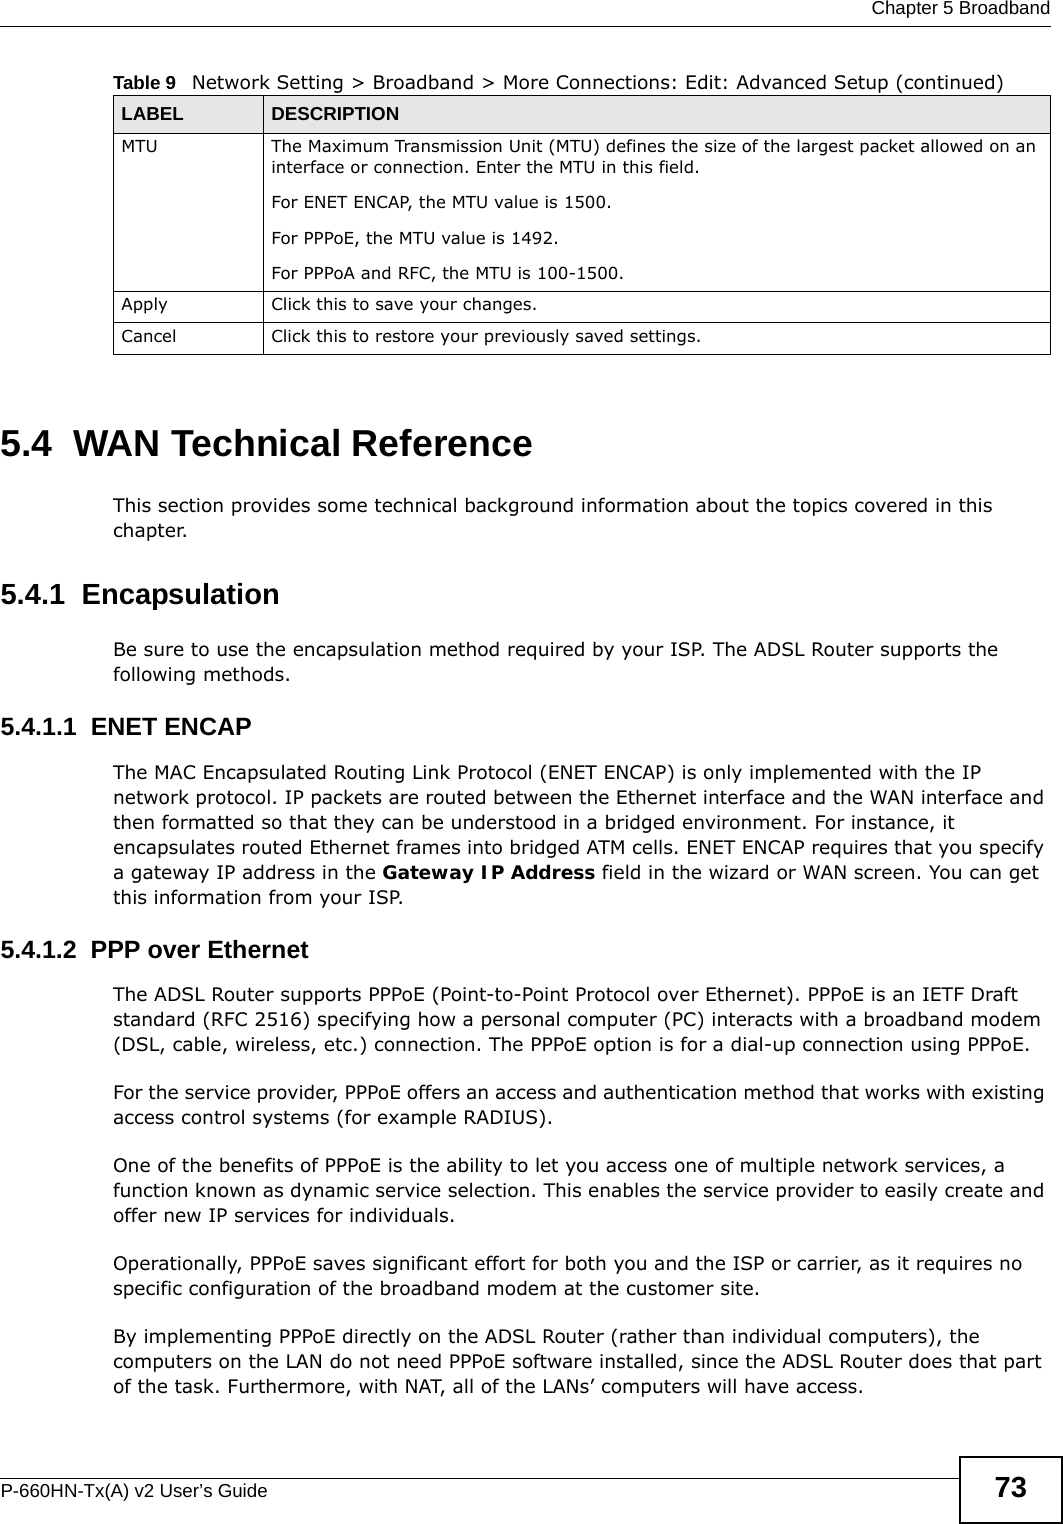  Chapter 5 BroadbandP-660HN-Tx(A) v2 User’s Guide 735.4  WAN Technical ReferenceThis section provides some technical background information about the topics covered in this chapter.5.4.1  EncapsulationBe sure to use the encapsulation method required by your ISP. The ADSL Router supports the following methods.5.4.1.1  ENET ENCAPThe MAC Encapsulated Routing Link Protocol (ENET ENCAP) is only implemented with the IP network protocol. IP packets are routed between the Ethernet interface and the WAN interface and then formatted so that they can be understood in a bridged environment. For instance, it encapsulates routed Ethernet frames into bridged ATM cells. ENET ENCAP requires that you specify a gateway IP address in the Gateway IP Address field in the wizard or WAN screen. You can get this information from your ISP.5.4.1.2  PPP over EthernetThe ADSL Router supports PPPoE (Point-to-Point Protocol over Ethernet). PPPoE is an IETF Draft standard (RFC 2516) specifying how a personal computer (PC) interacts with a broadband modem (DSL, cable, wireless, etc.) connection. The PPPoE option is for a dial-up connection using PPPoE.For the service provider, PPPoE offers an access and authentication method that works with existing access control systems (for example RADIUS).One of the benefits of PPPoE is the ability to let you access one of multiple network services, a function known as dynamic service selection. This enables the service provider to easily create and offer new IP services for individuals.Operationally, PPPoE saves significant effort for both you and the ISP or carrier, as it requires no specific configuration of the broadband modem at the customer site.By implementing PPPoE directly on the ADSL Router (rather than individual computers), the computers on the LAN do not need PPPoE software installed, since the ADSL Router does that part of the task. Furthermore, with NAT, all of the LANs’ computers will have access.MTU The Maximum Transmission Unit (MTU) defines the size of the largest packet allowed on an interface or connection. Enter the MTU in this field.For ENET ENCAP, the MTU value is 1500.For PPPoE, the MTU value is 1492.For PPPoA and RFC, the MTU is 100-1500.Apply Click this to save your changes. Cancel Click this to restore your previously saved settings.Table 9   Network Setting &gt; Broadband &gt; More Connections: Edit: Advanced Setup (continued)LABEL DESCRIPTION